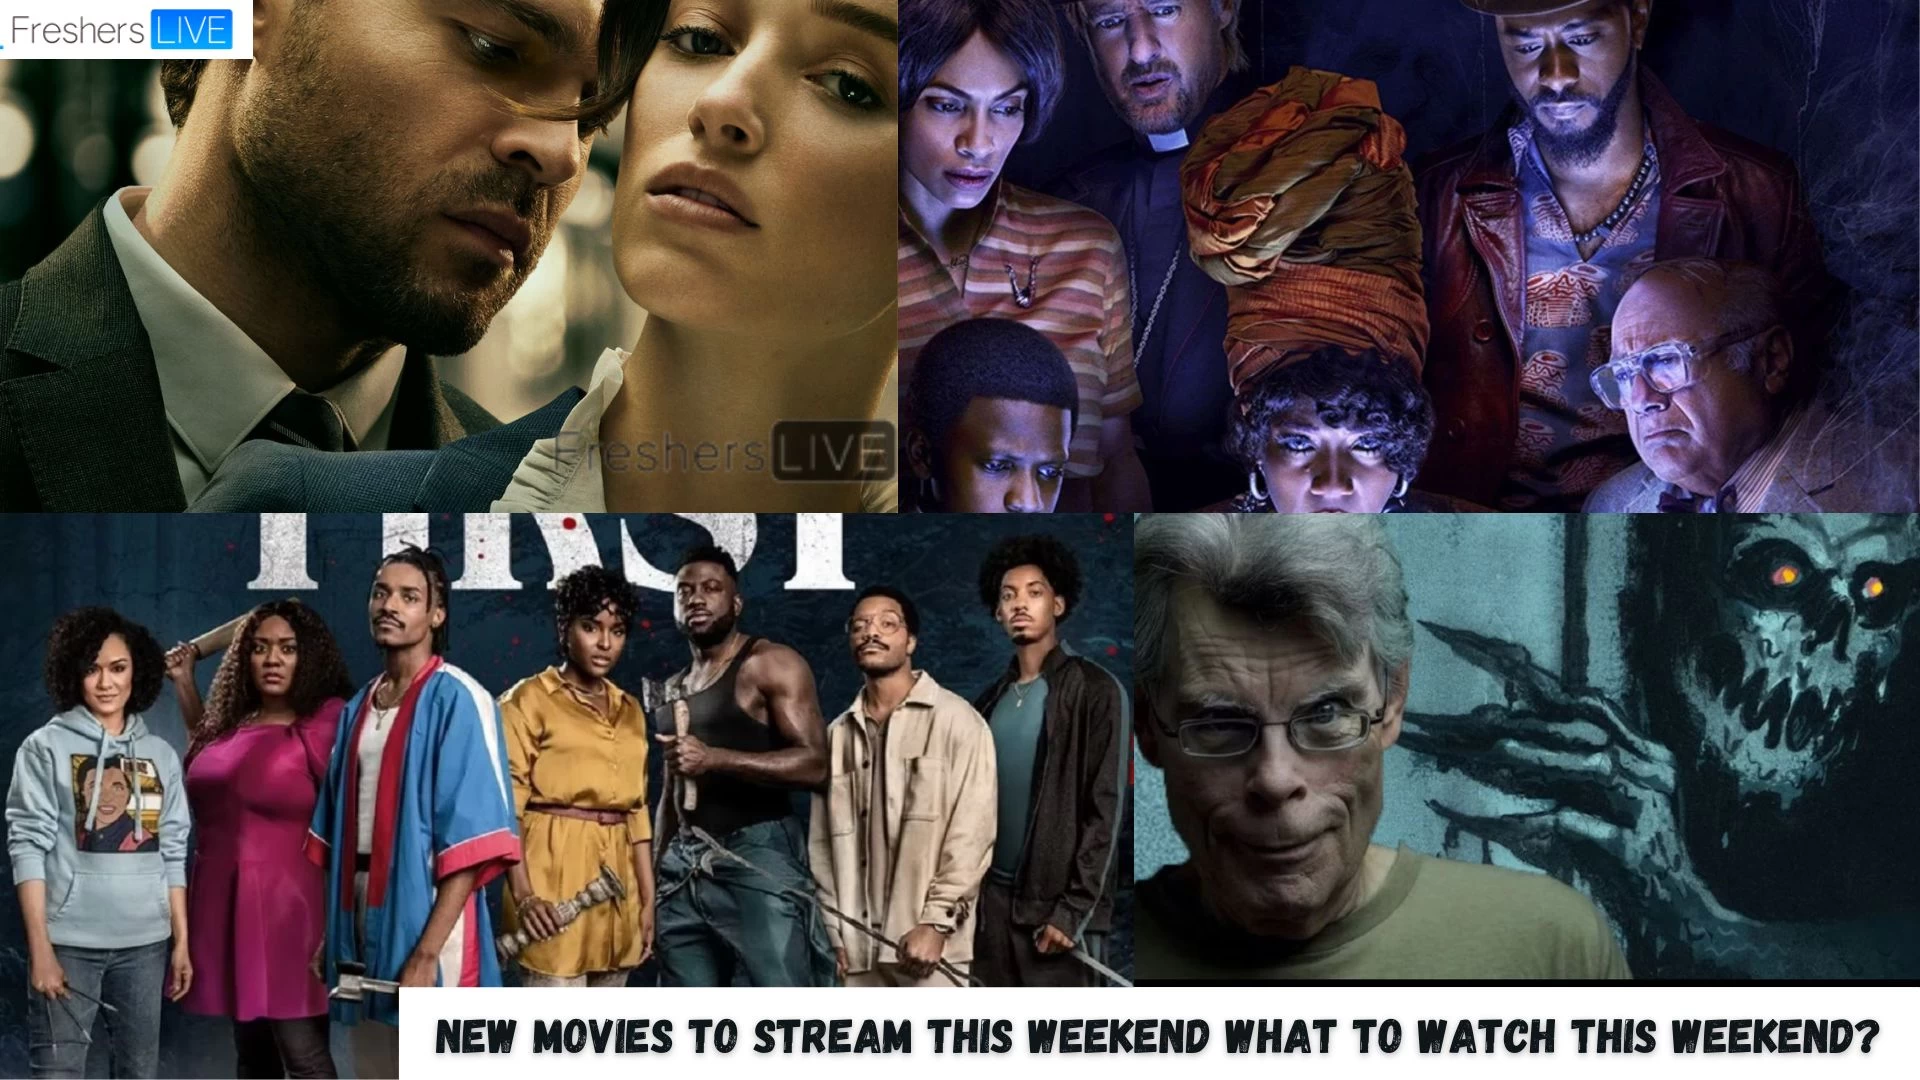 New Movies to Stream this Weekend, What to Watch this Weekend?